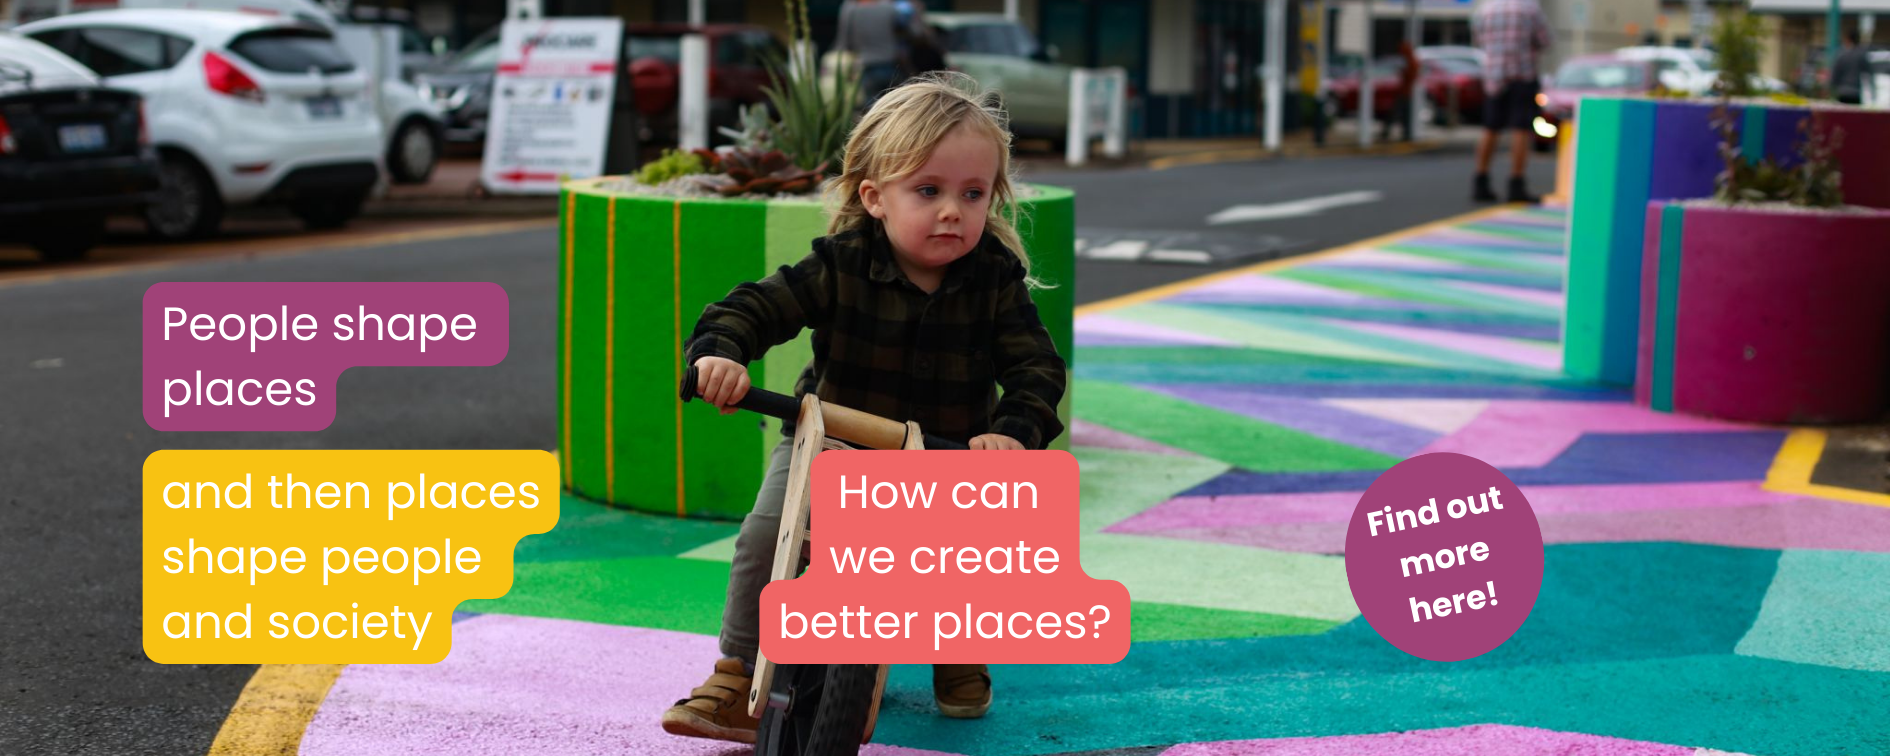 Placemaking. People shape place and then places shape people and society. How can we create better places? Find out more here. The image show a small boy riding a small bicycle on a roadway painted in bright colours with painted concrete planters in the background.